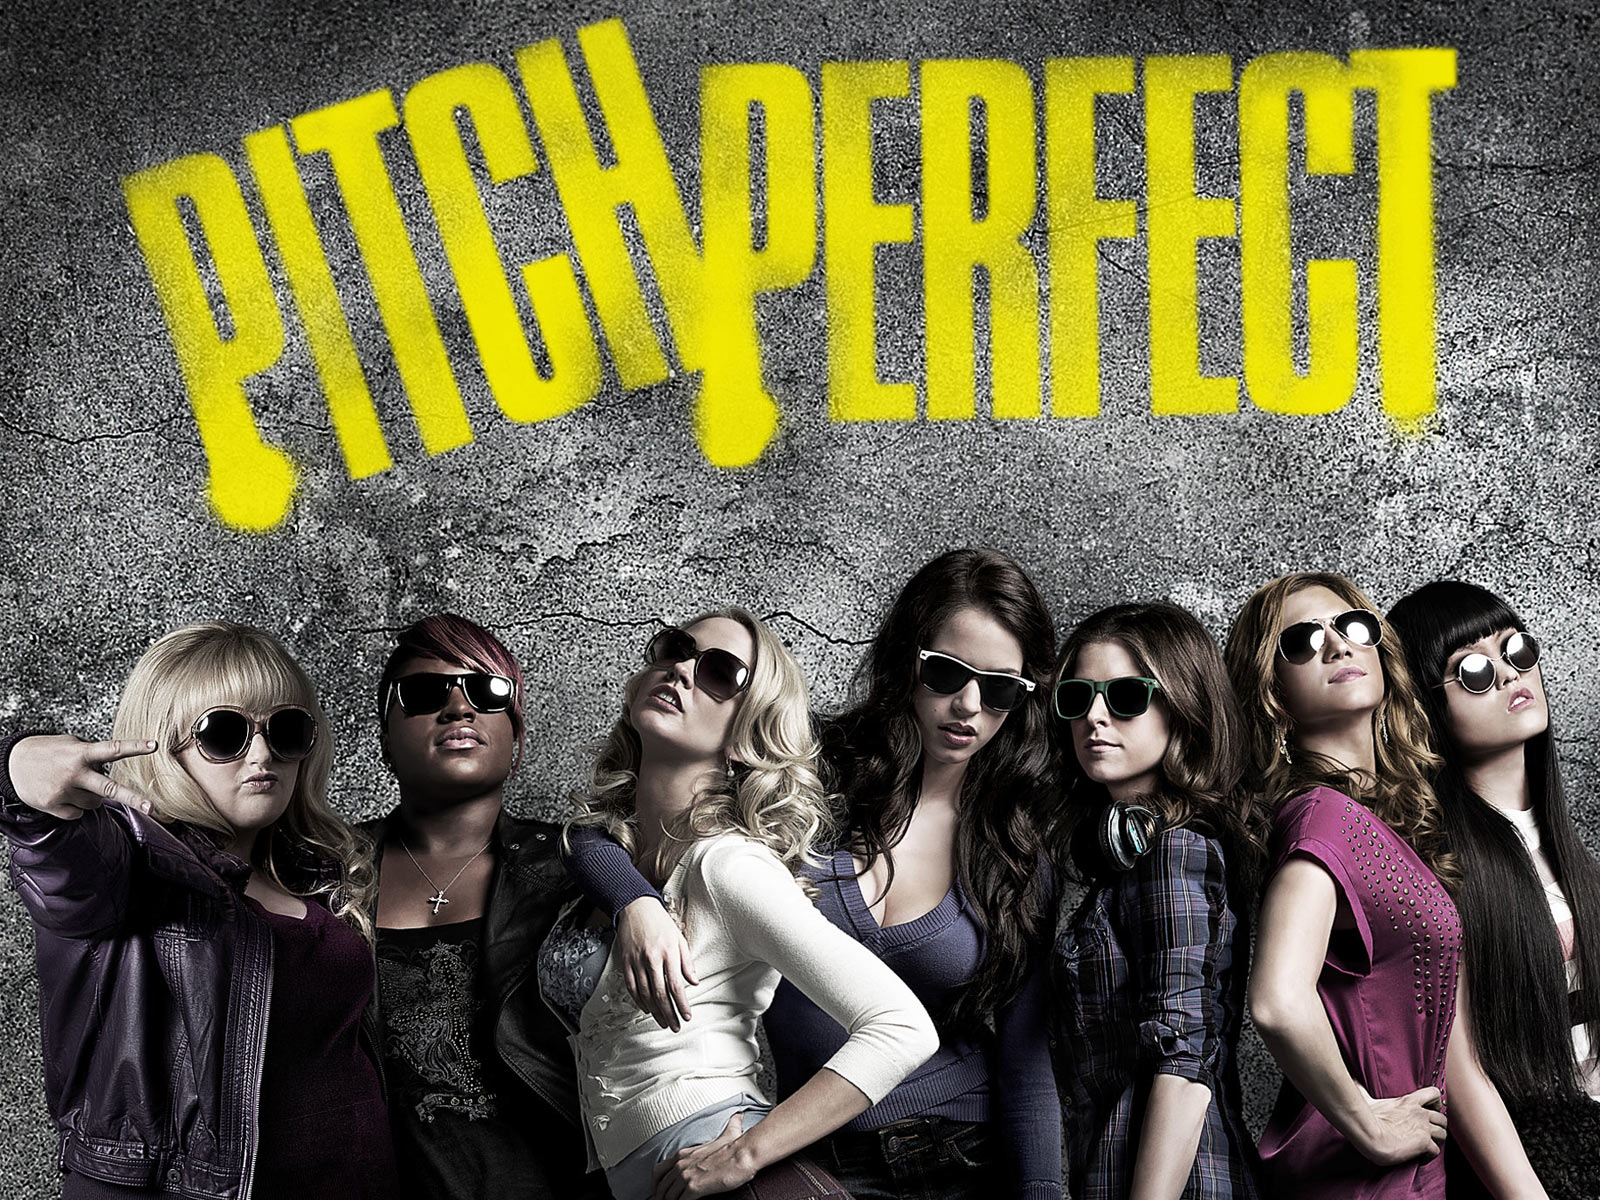 Pitch Perfect Pics, Movie Collection